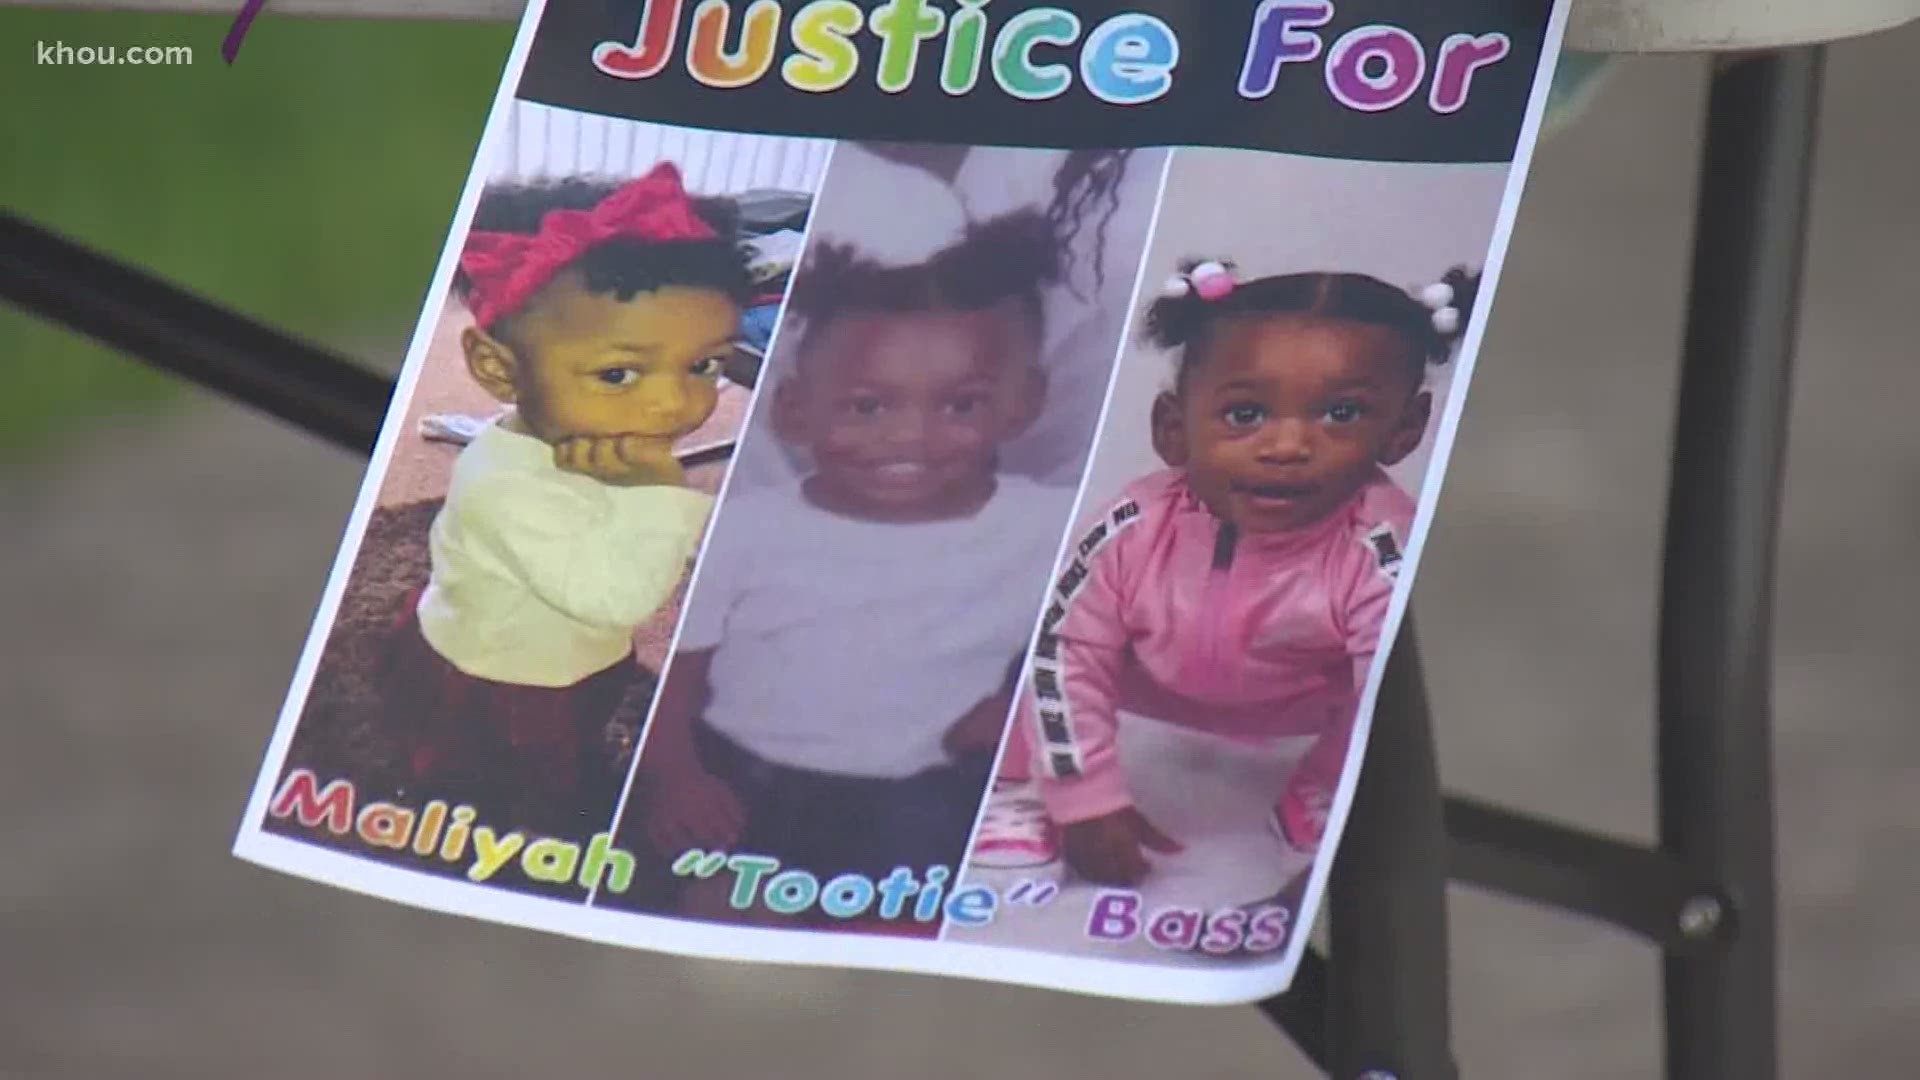 On Saturday, Maliyah’s grandmother, Rosalie Jimerson, said Maliyah’s mother had been notified that the body found belongs to her daughter.